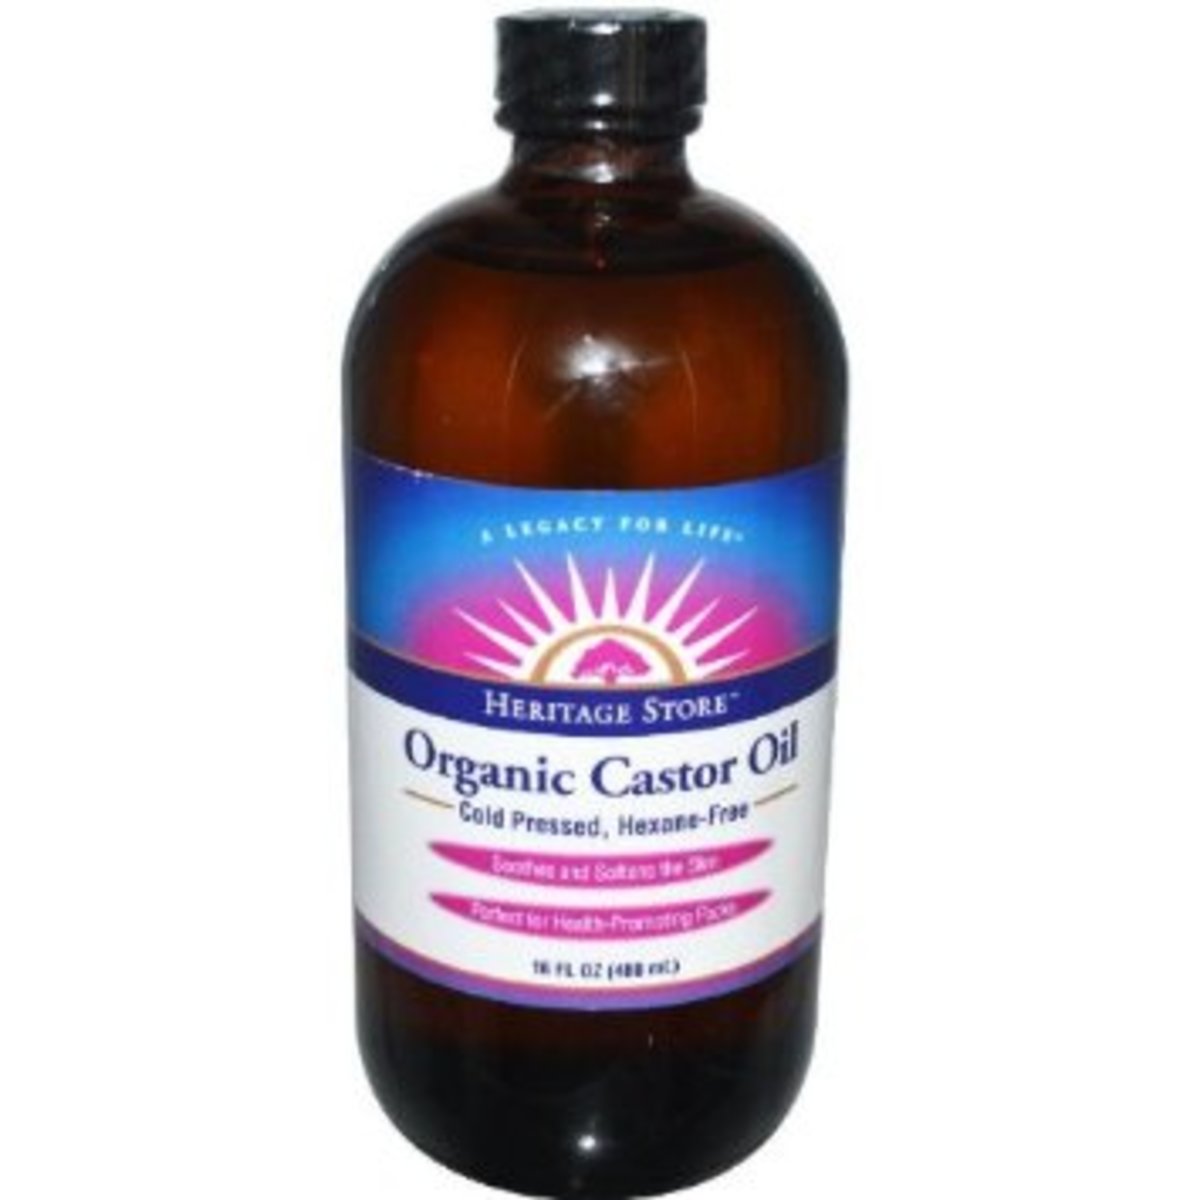 What I used: Heritage Organic Castor Oil 